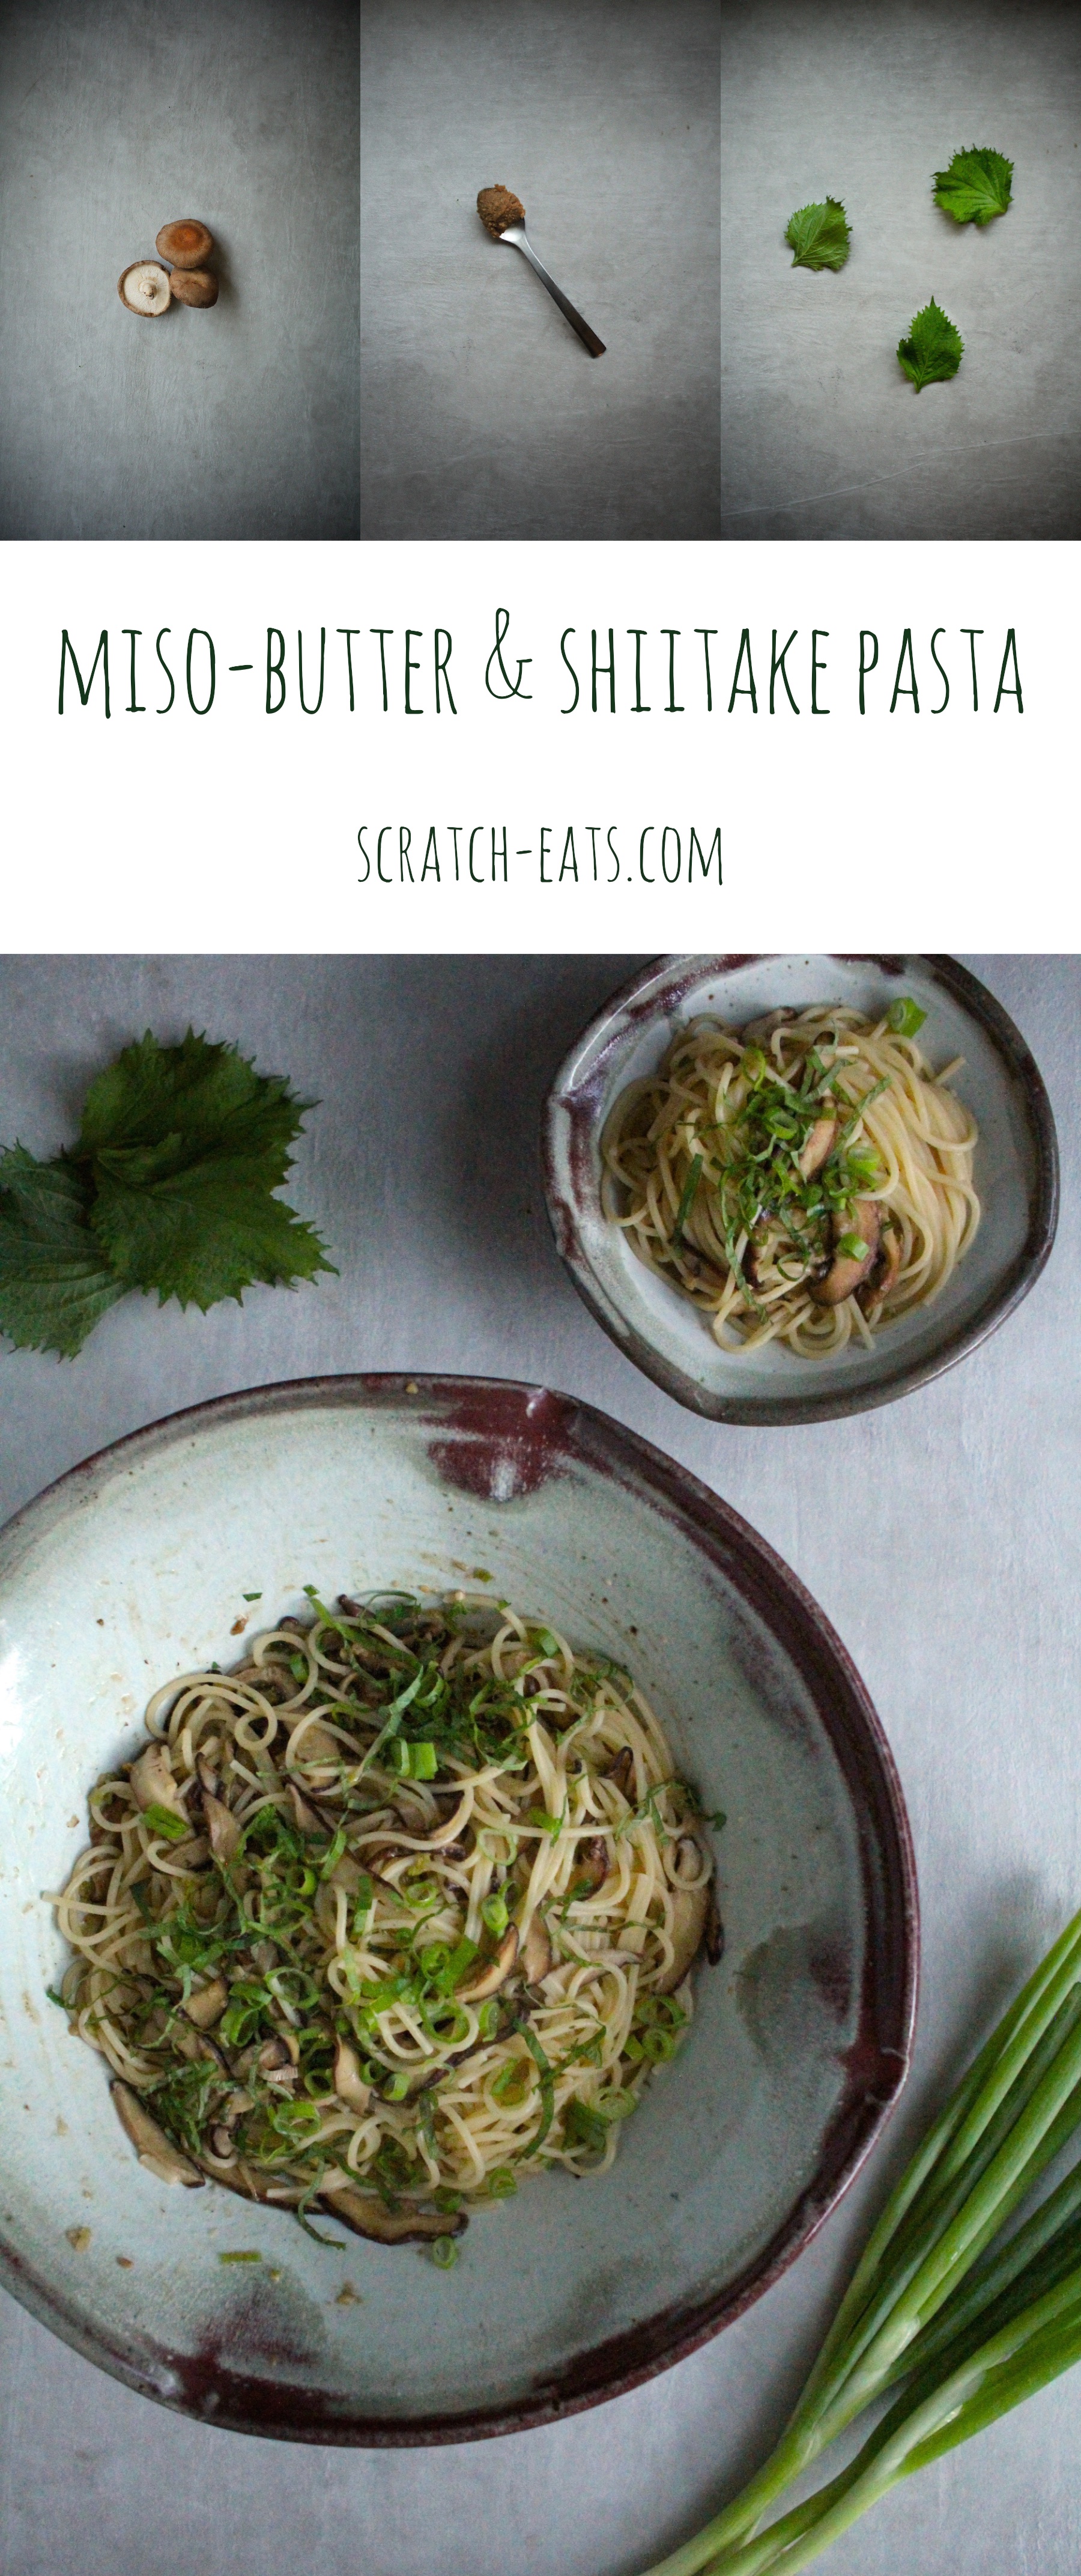 Miso-Butter and Shiitake Pasta